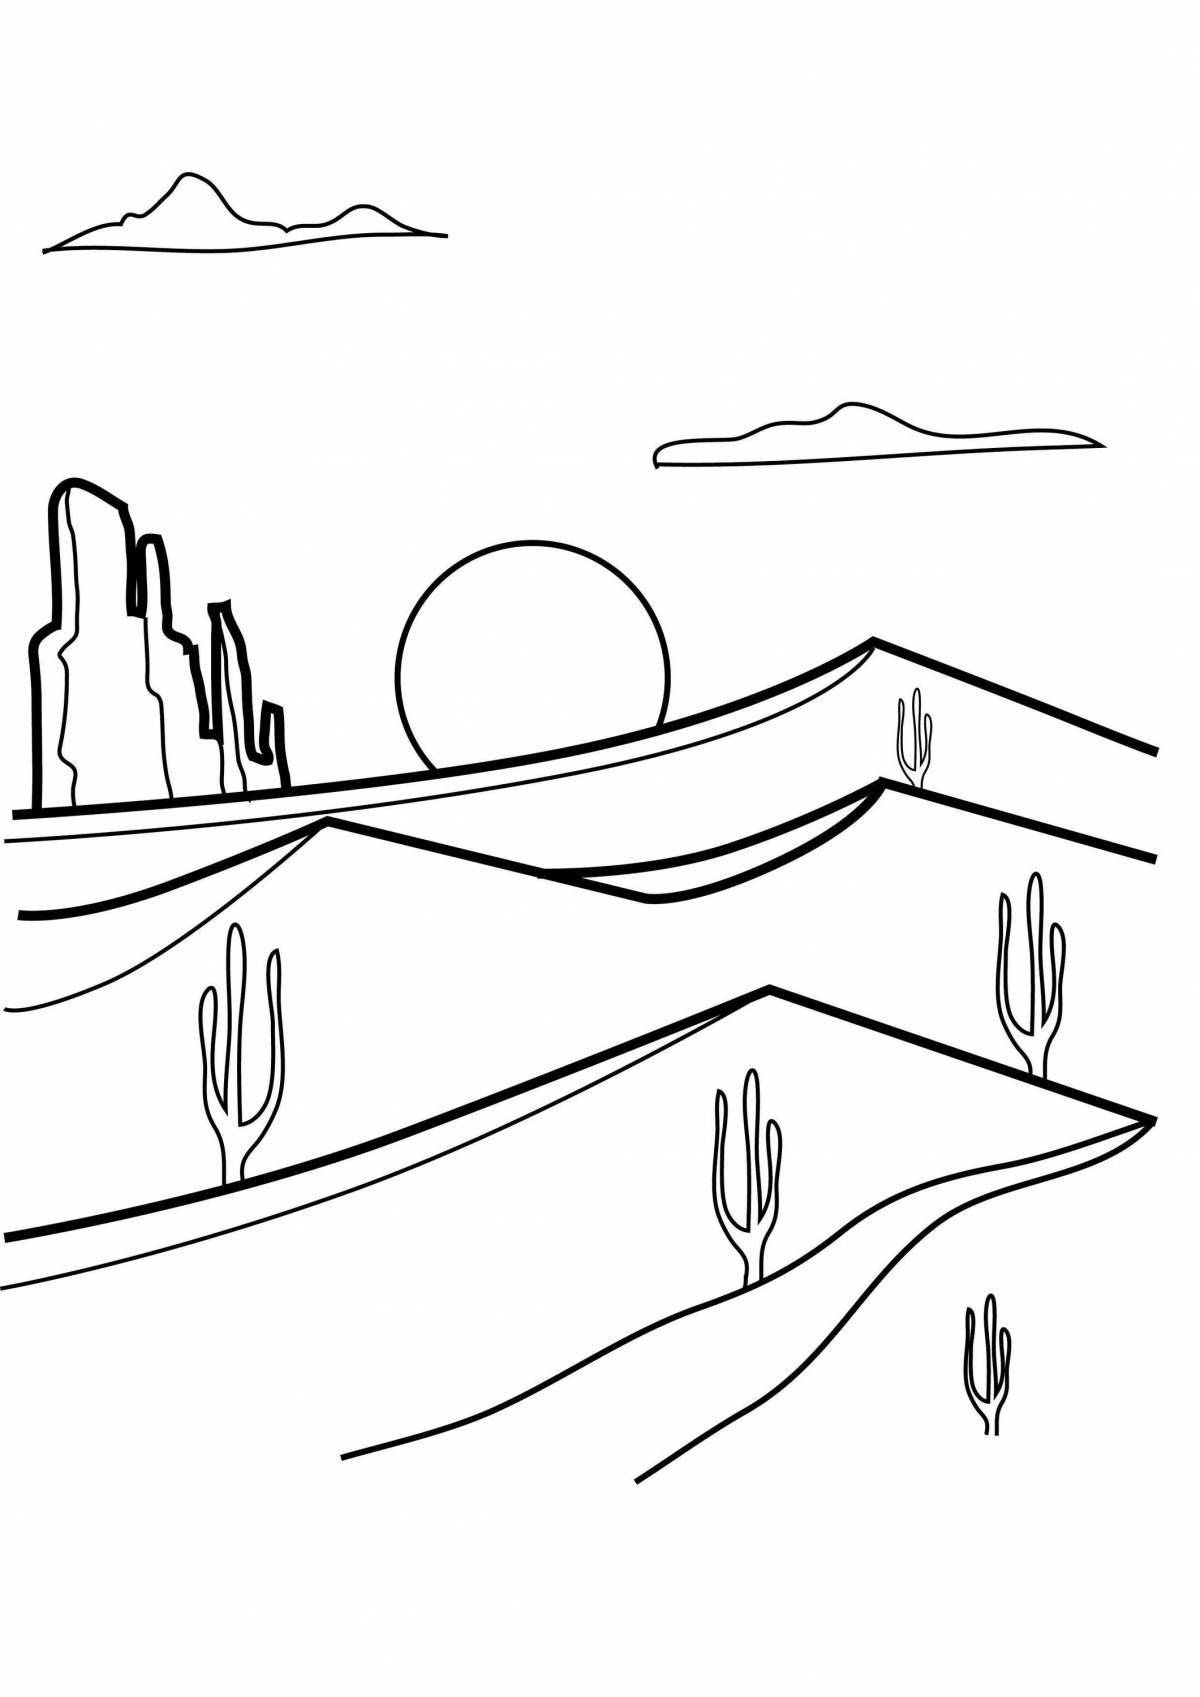 Crazy color desert coloring pages for kids